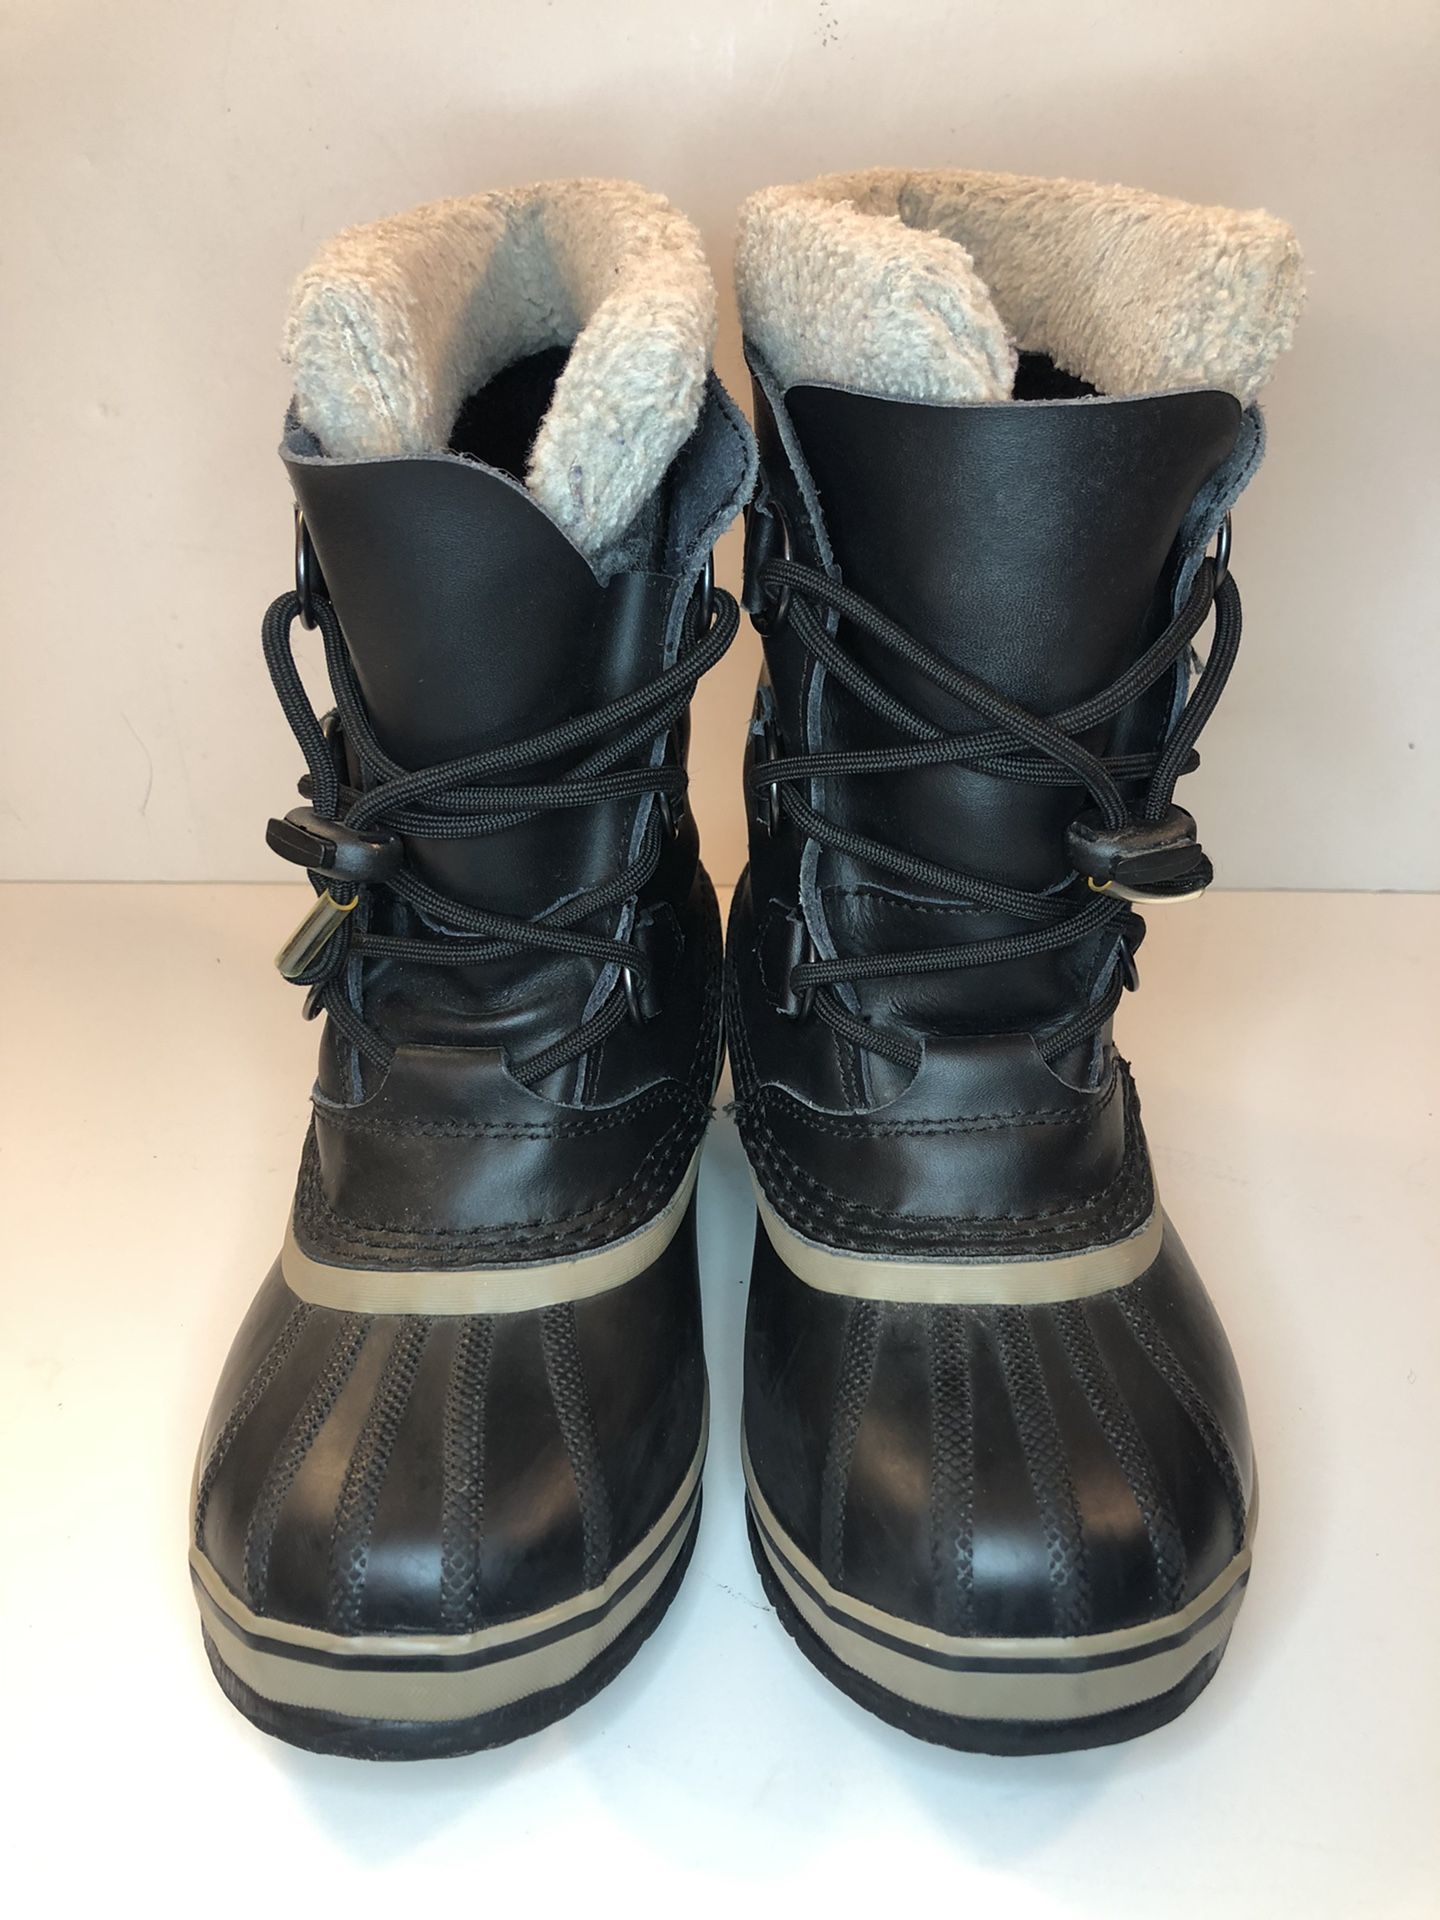 Sorel Yoot Pac Black Leather Rubber Winter Snow Boots Youth Size 3 NY1880-013